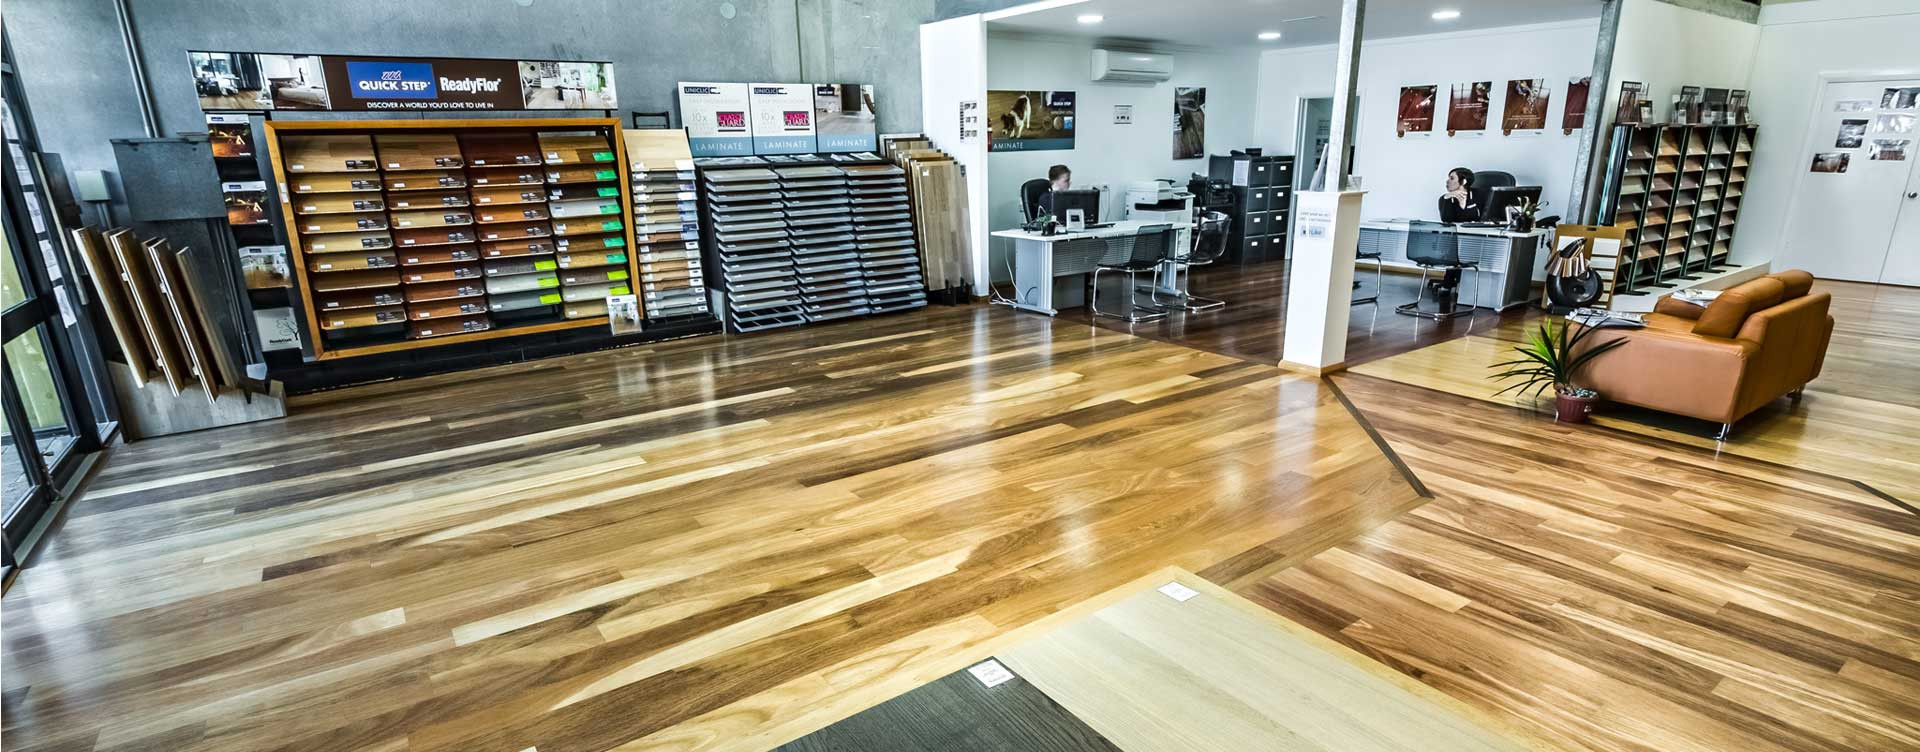 11 Recommended Wide Plank Laminate Hardwood Flooring 2022 free download wide plank laminate hardwood flooring of timber flooring perth coastal flooring wa quality wooden regarding thats why they call us the home of fine wood floors